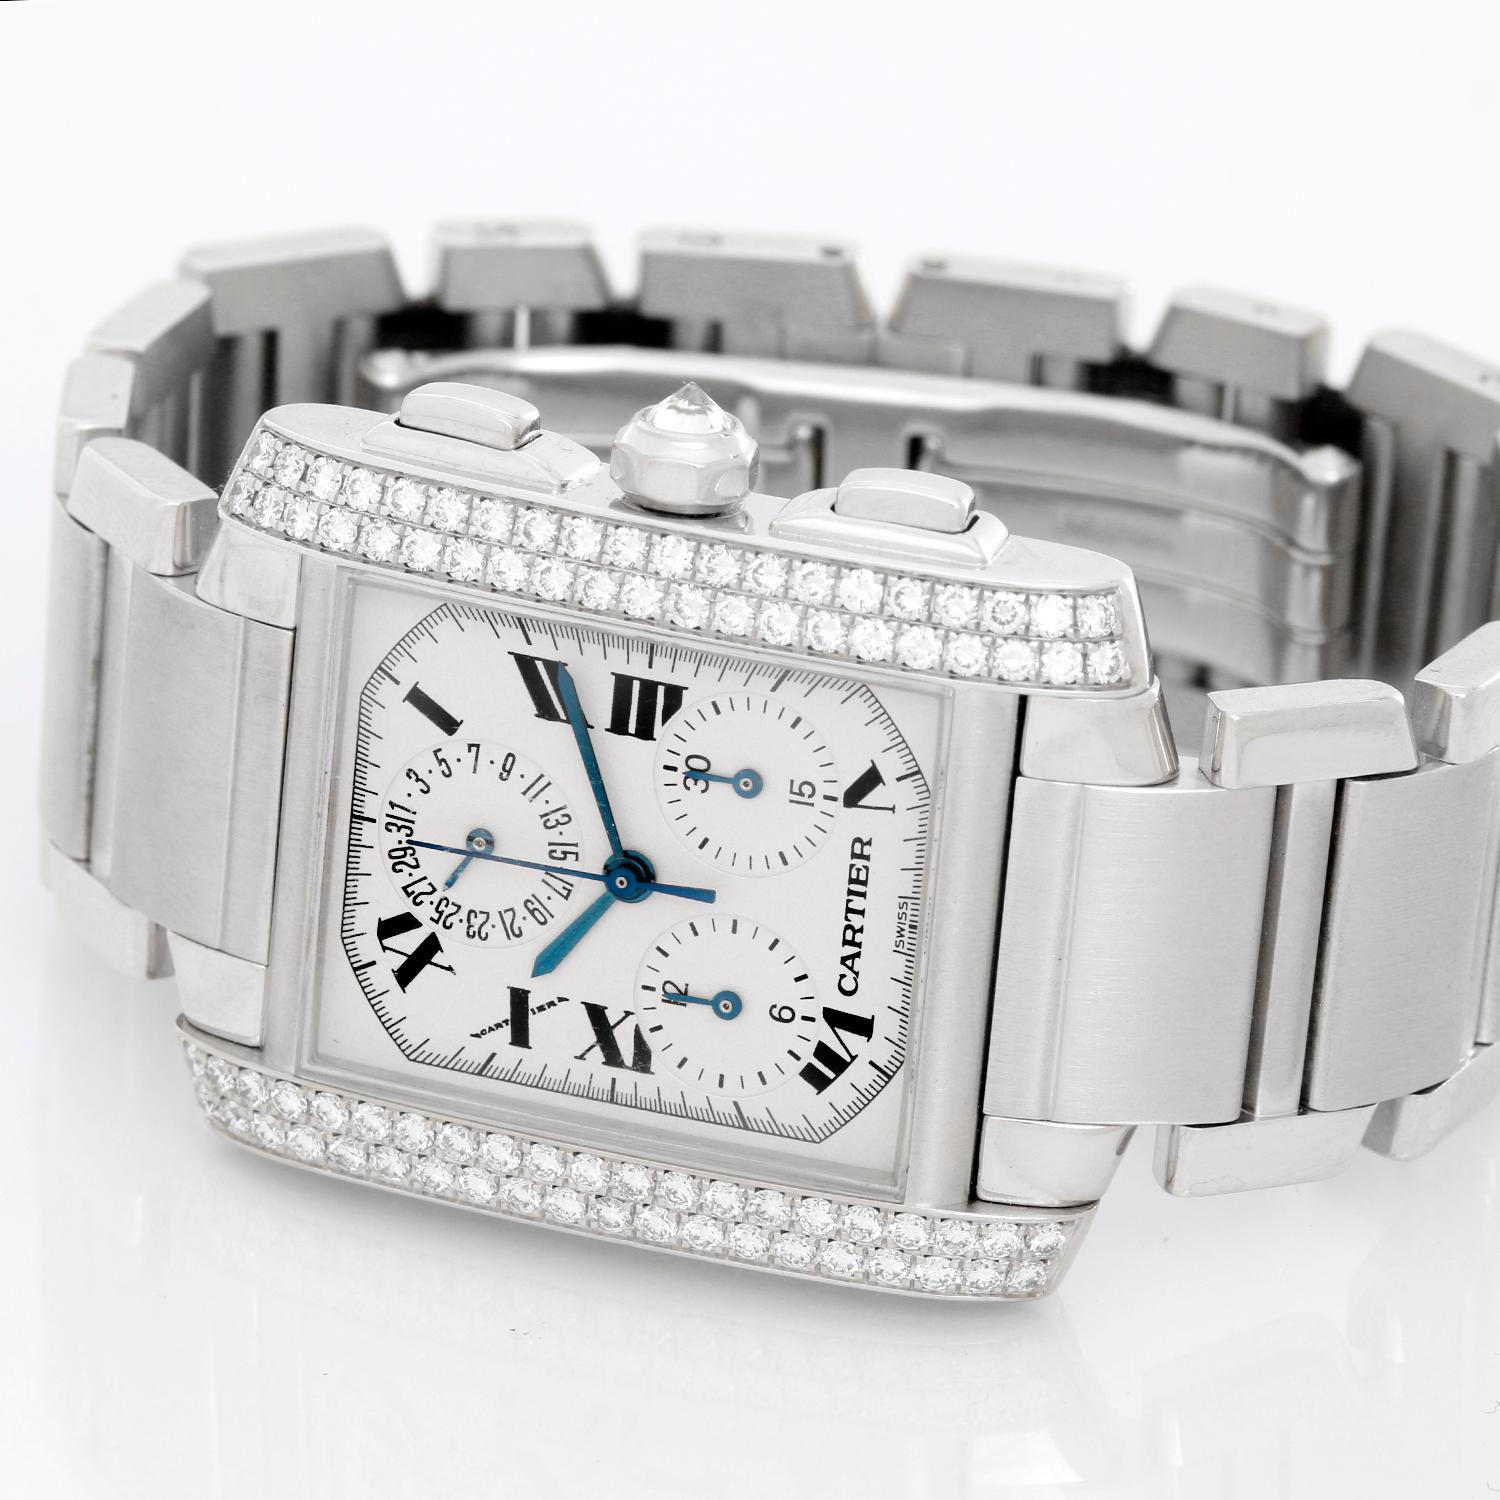 Cartier Tank Francaise 18K White Gold Chronograph - Automatic. 18K White Gold with two row of diamonds ( 29 x 35 mm ). Silvered dial with subseconds, date and chronograph. 18K White gold Cartier bracelet. Pre-owned with Cartier box .